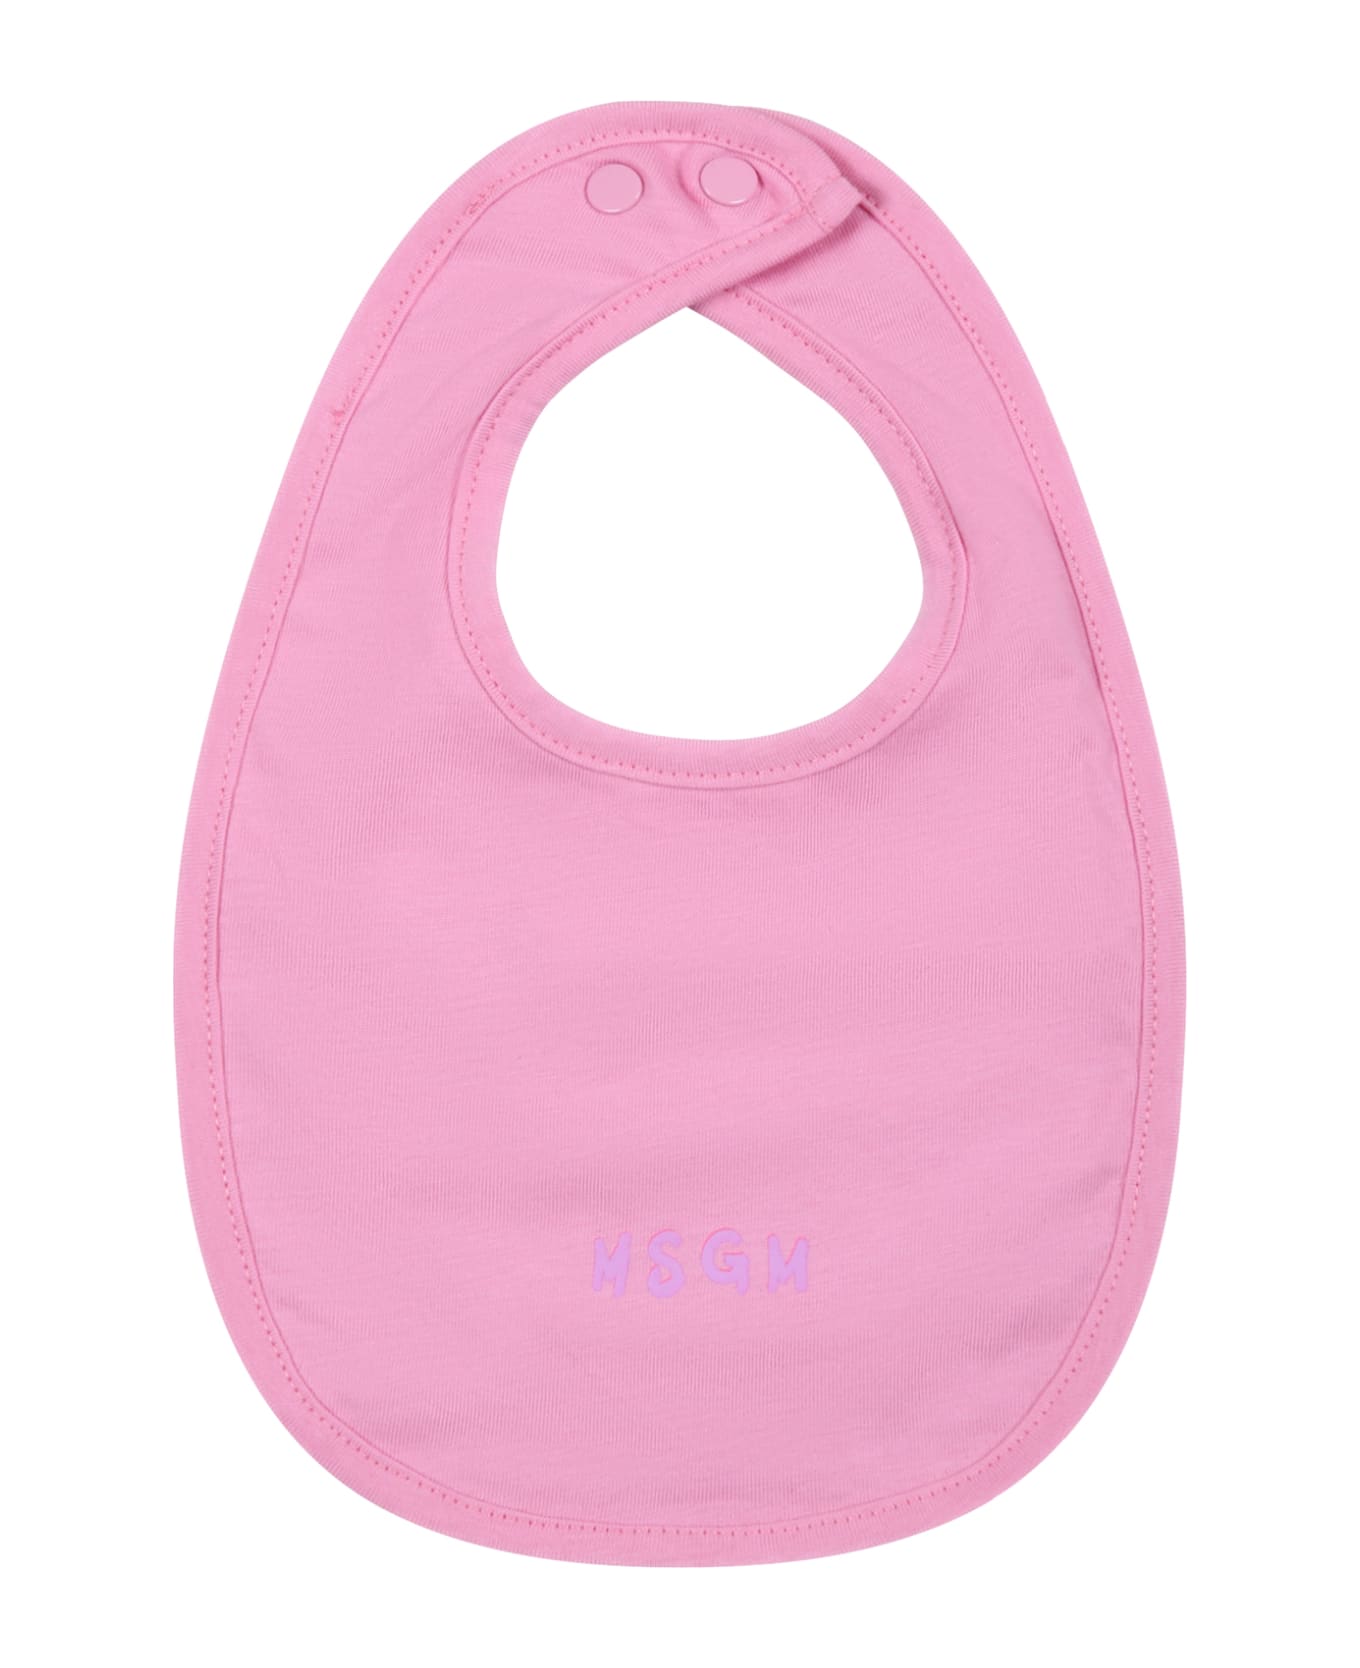 MSGM Pink Set For Baby Girl With Violet Logo - Pink ボディスーツ＆セットアップ